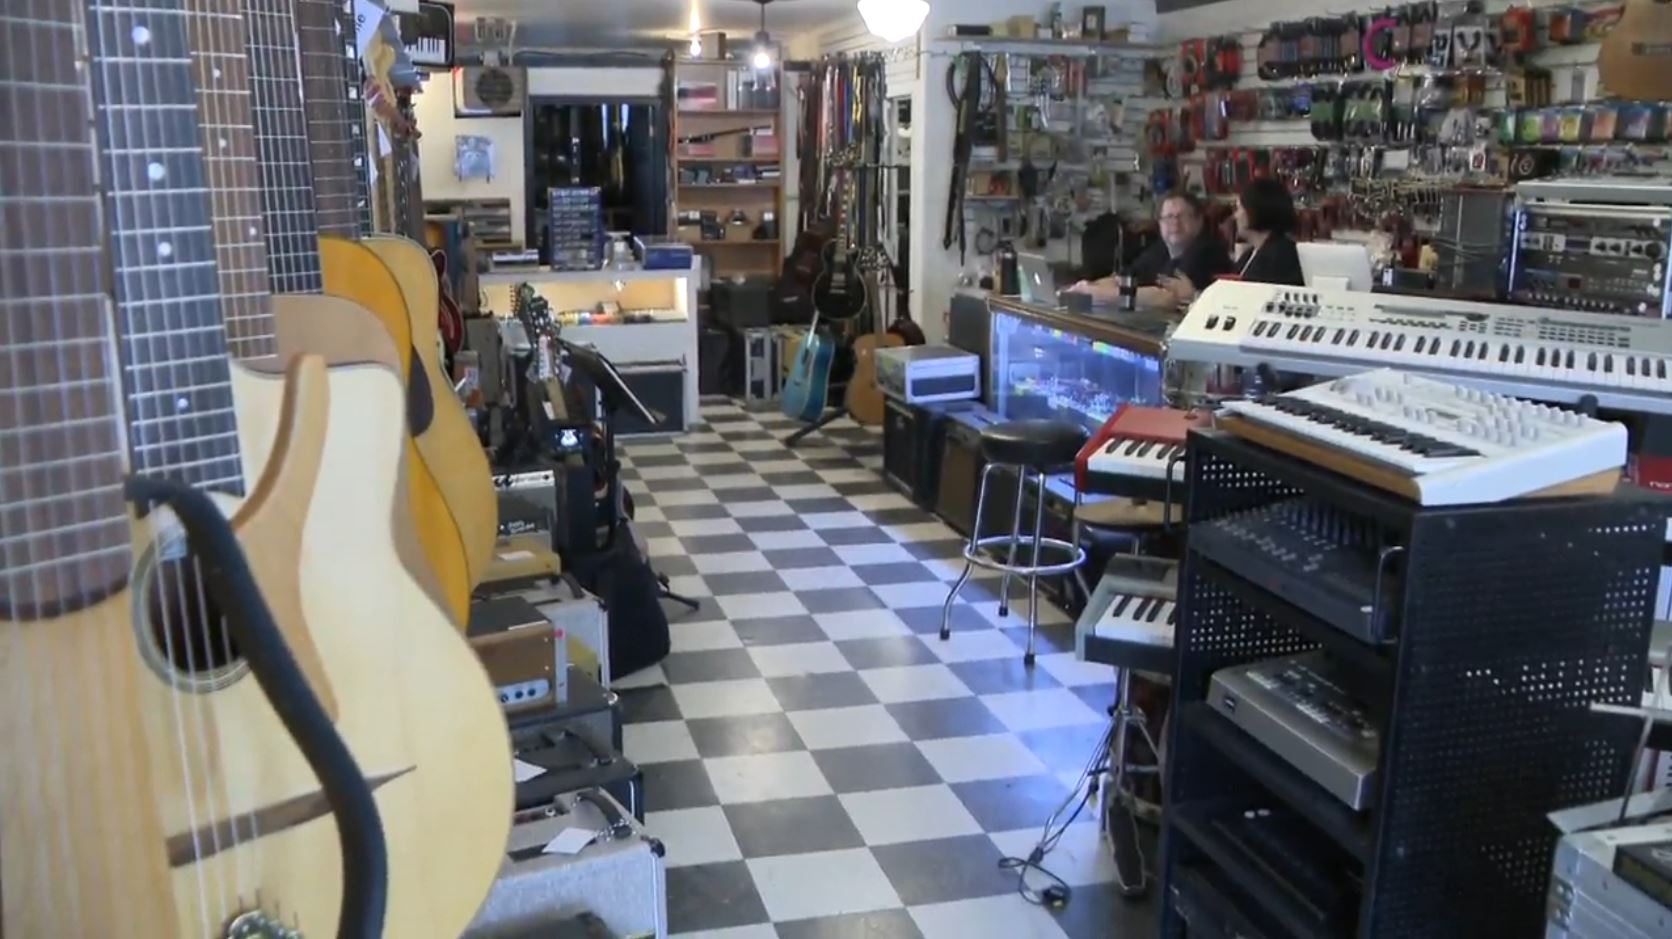 Vancouver music store falls victim to fraud, facing bankruptcy